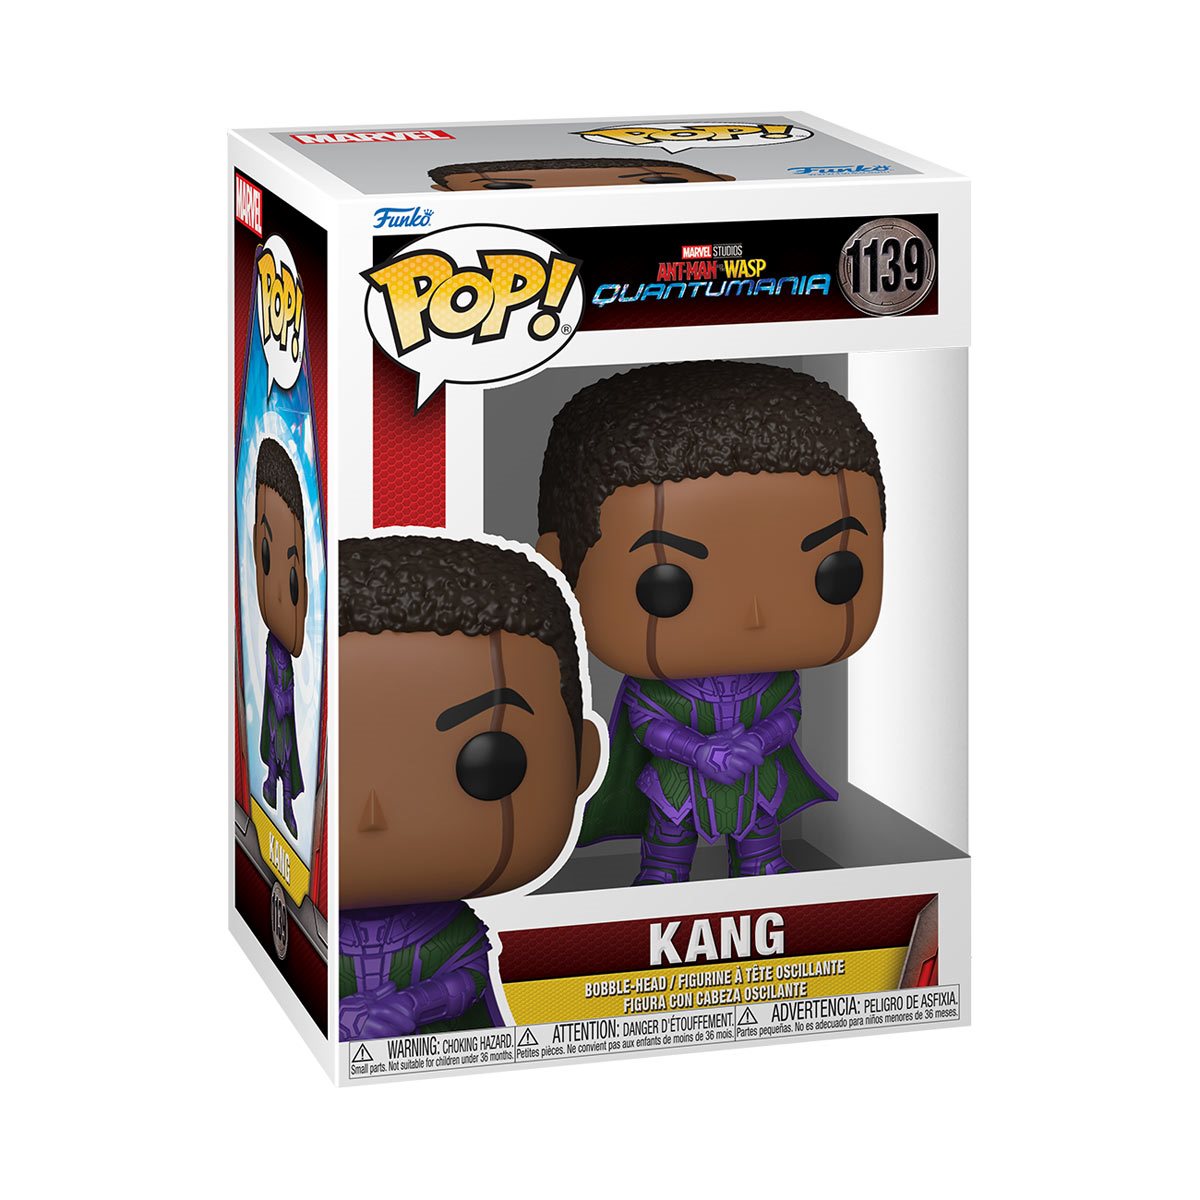 Ant-Man and the Wasp: Quantumania Kang Funko Pop! Vinyl Figure #1139 Marvel Superheroes Hip Crypt Entertainment Earth Movies